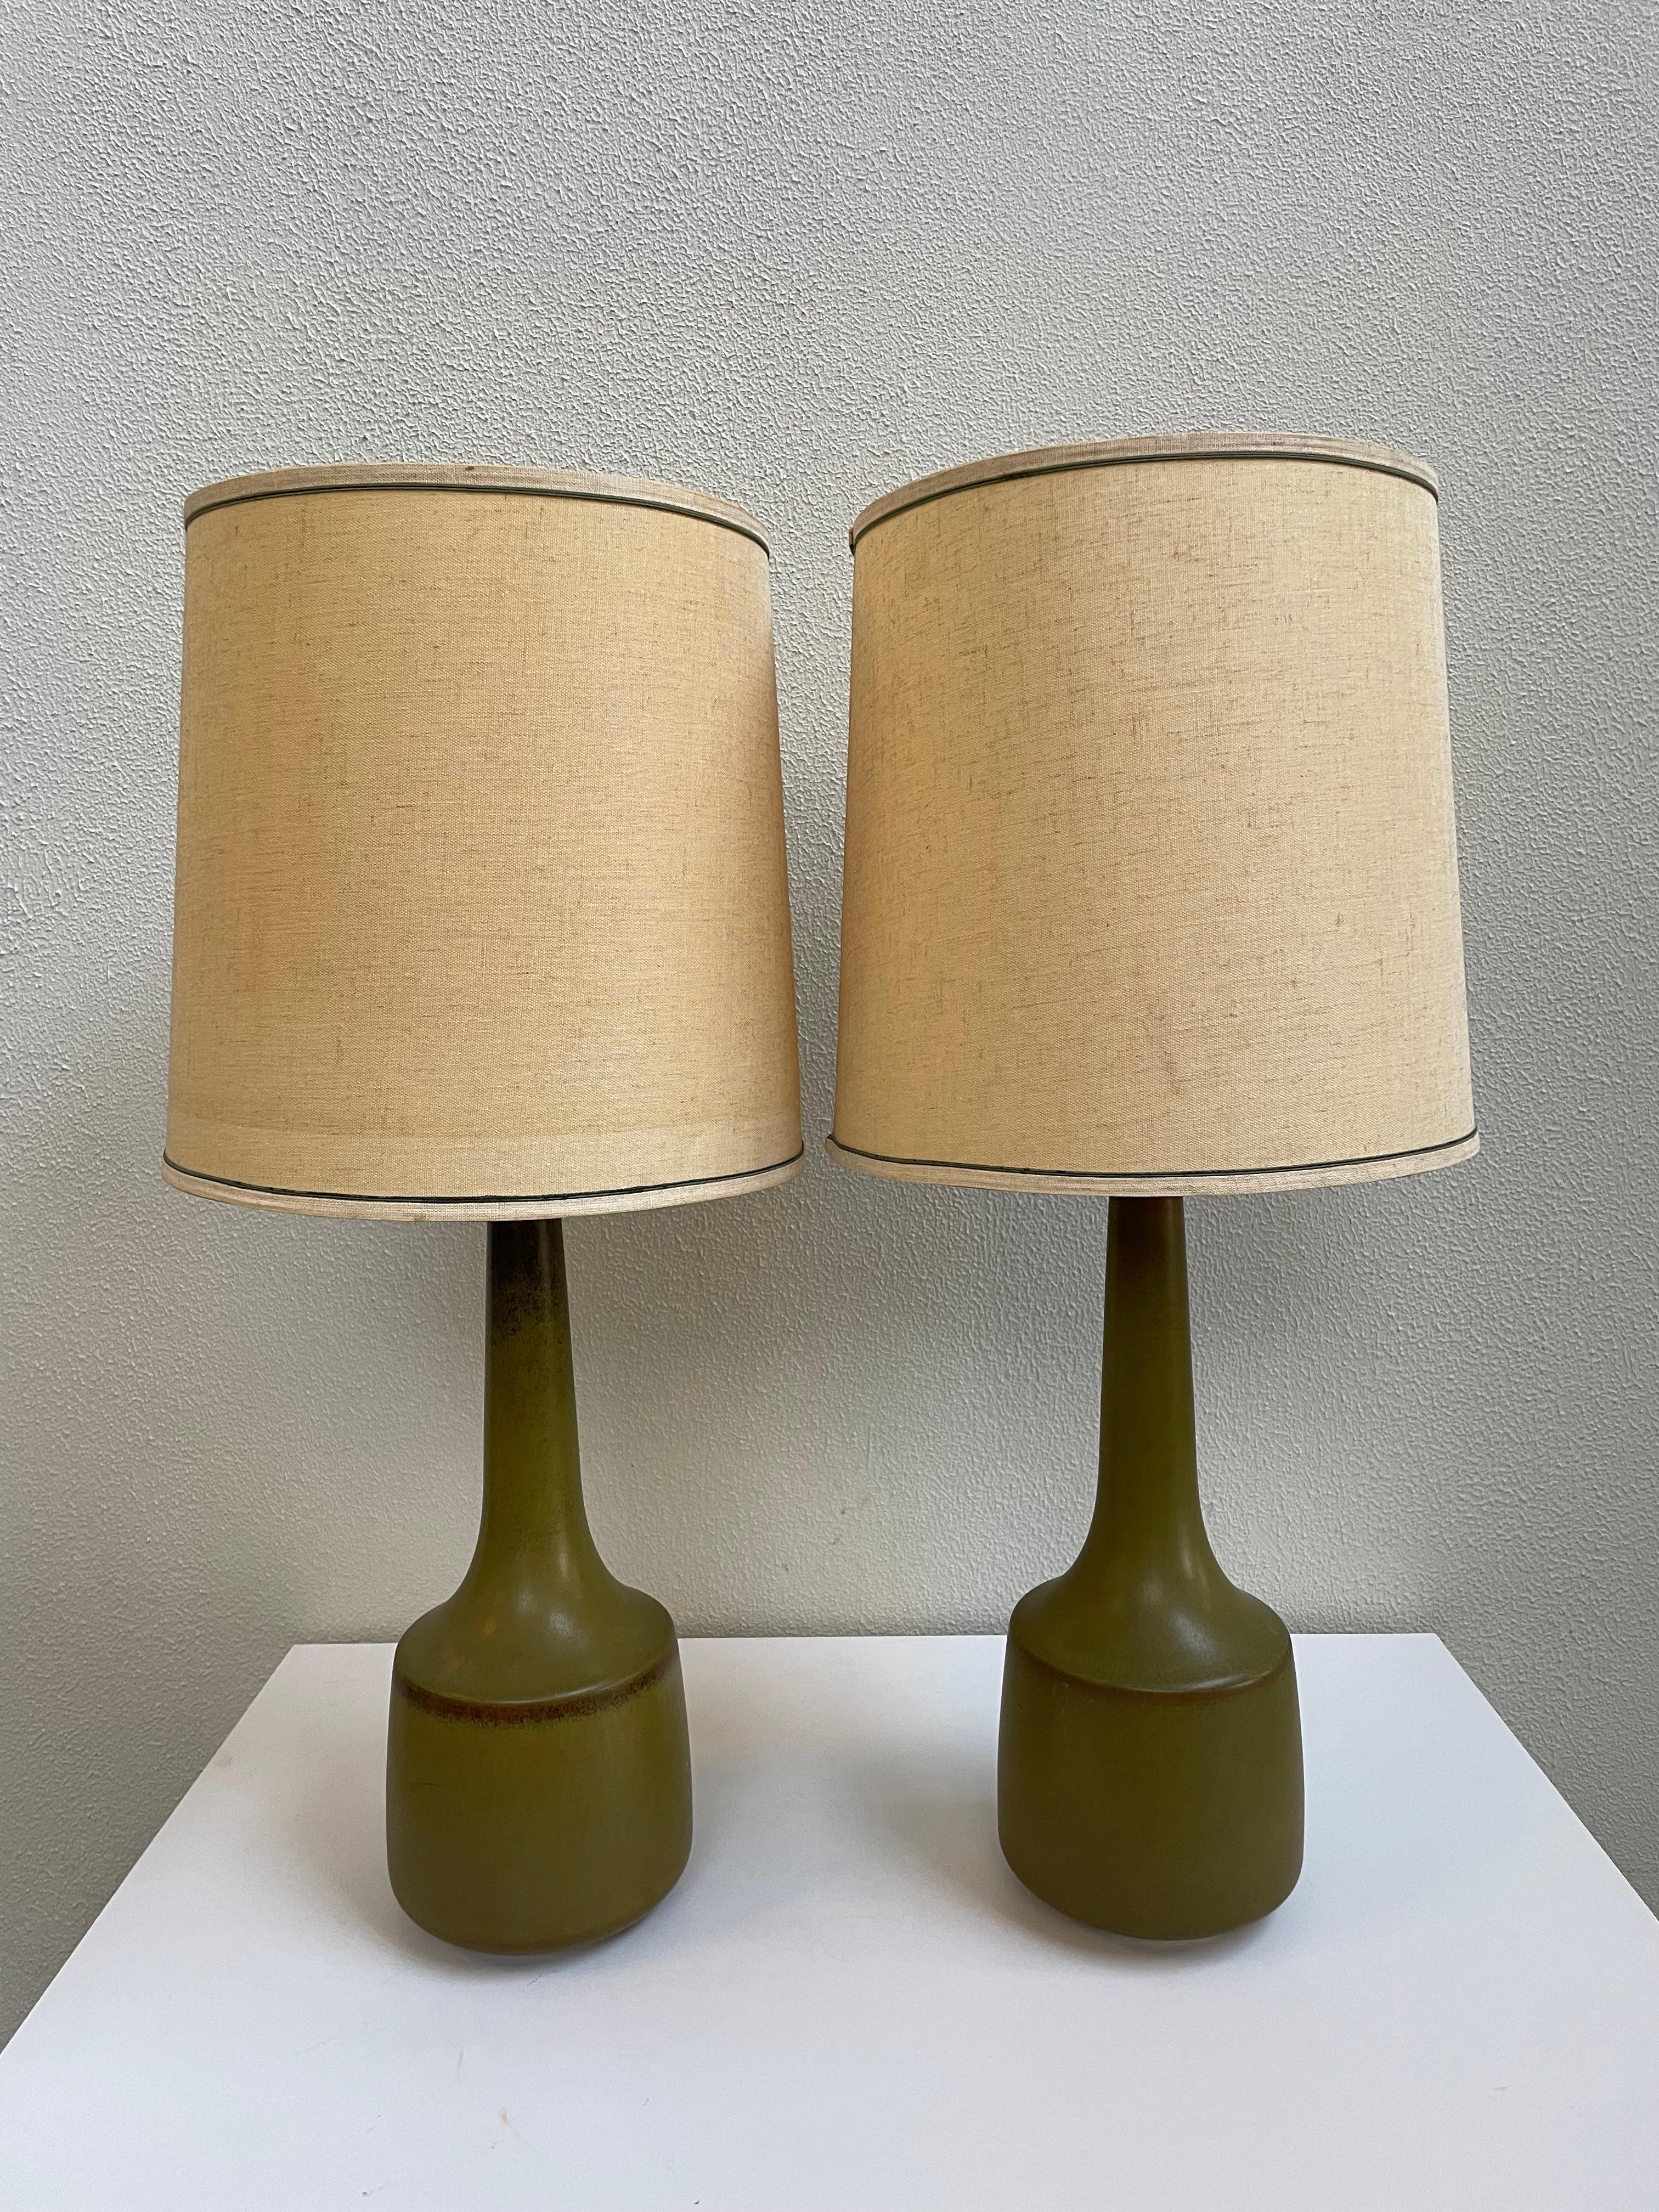 Beautiful Mid-Century Modern Bostlund table lamps with shades 

Measurements with shade included 15 x 15 inches.